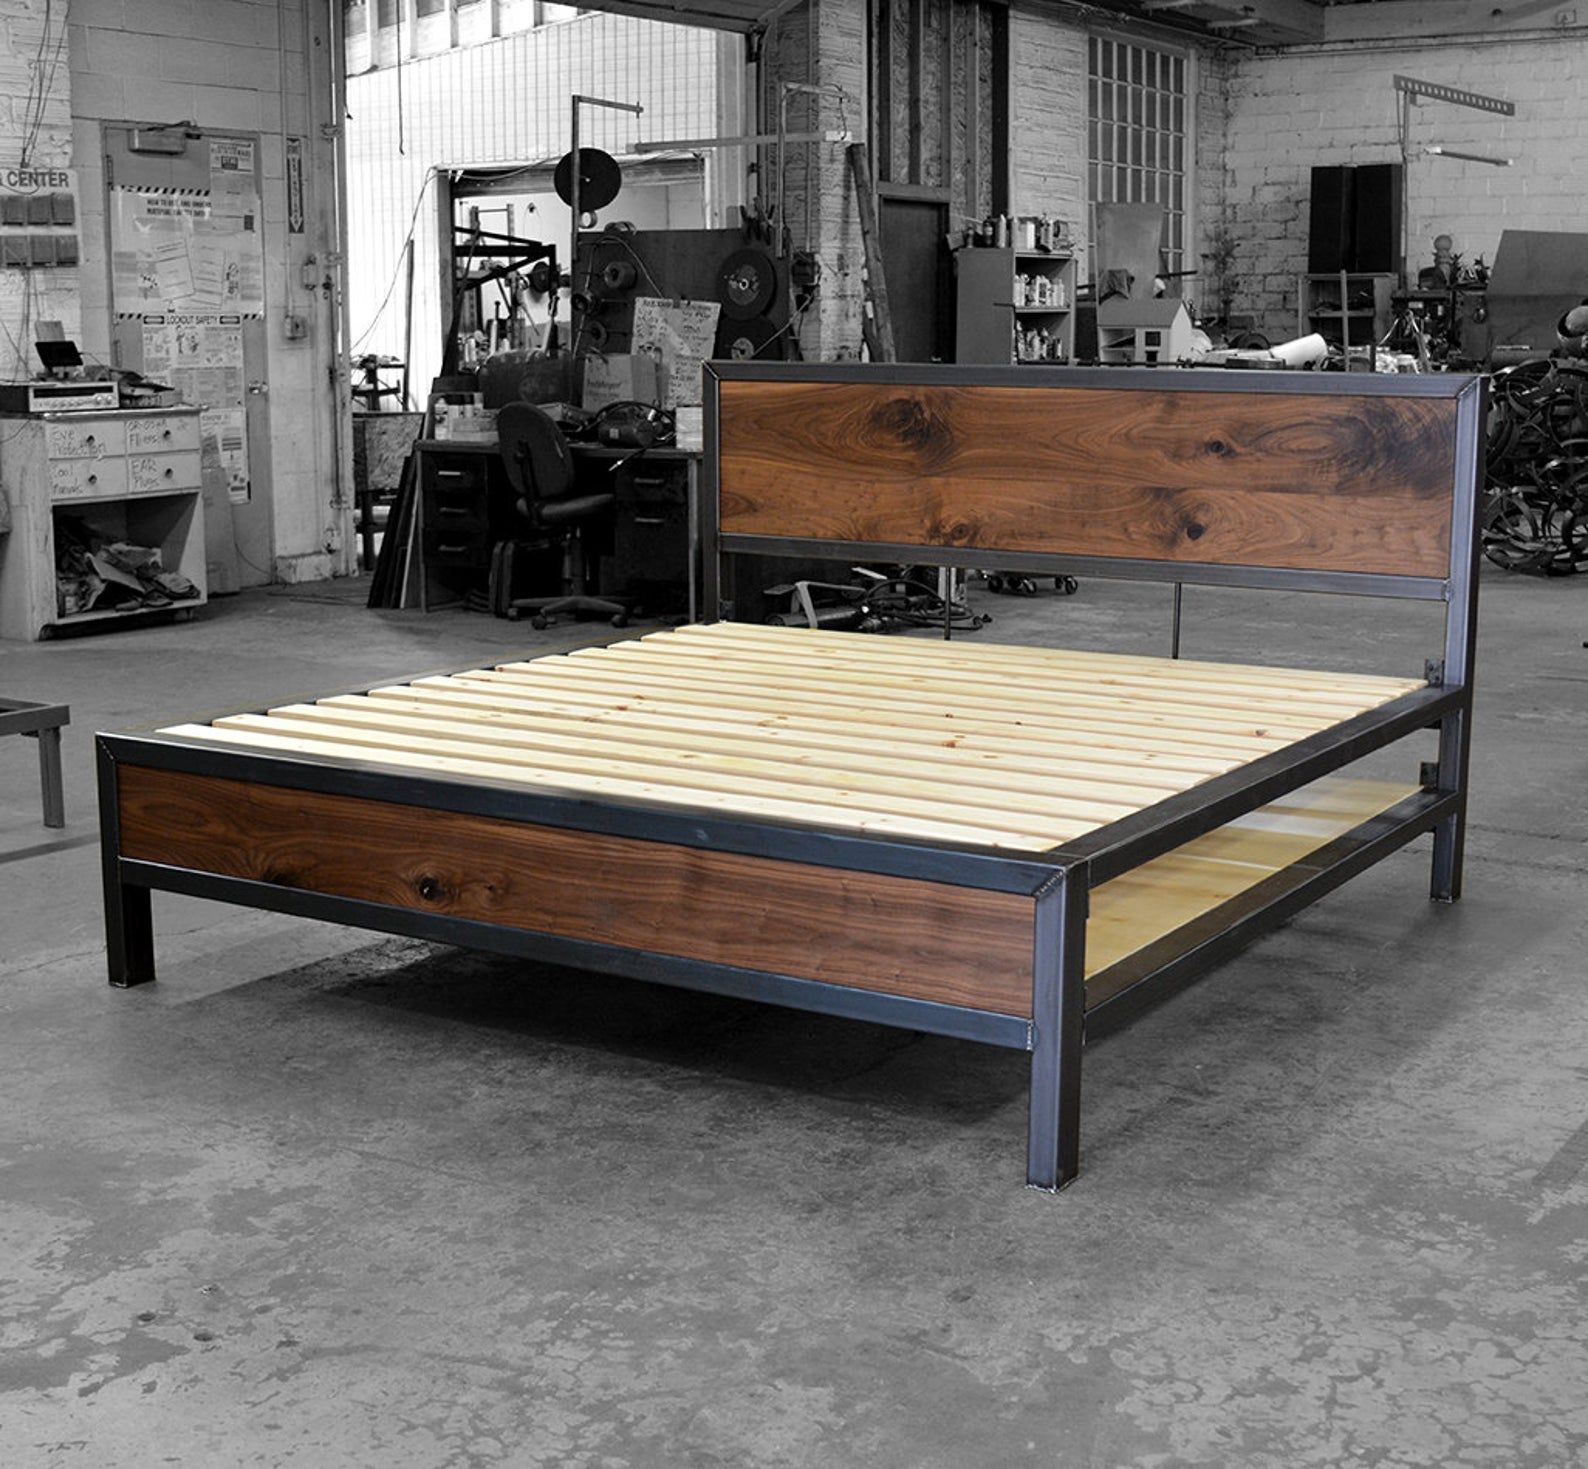 Early Century Bed with Storage - Early Century Bed with Storage -   15 diy Bed Frame steel ideas